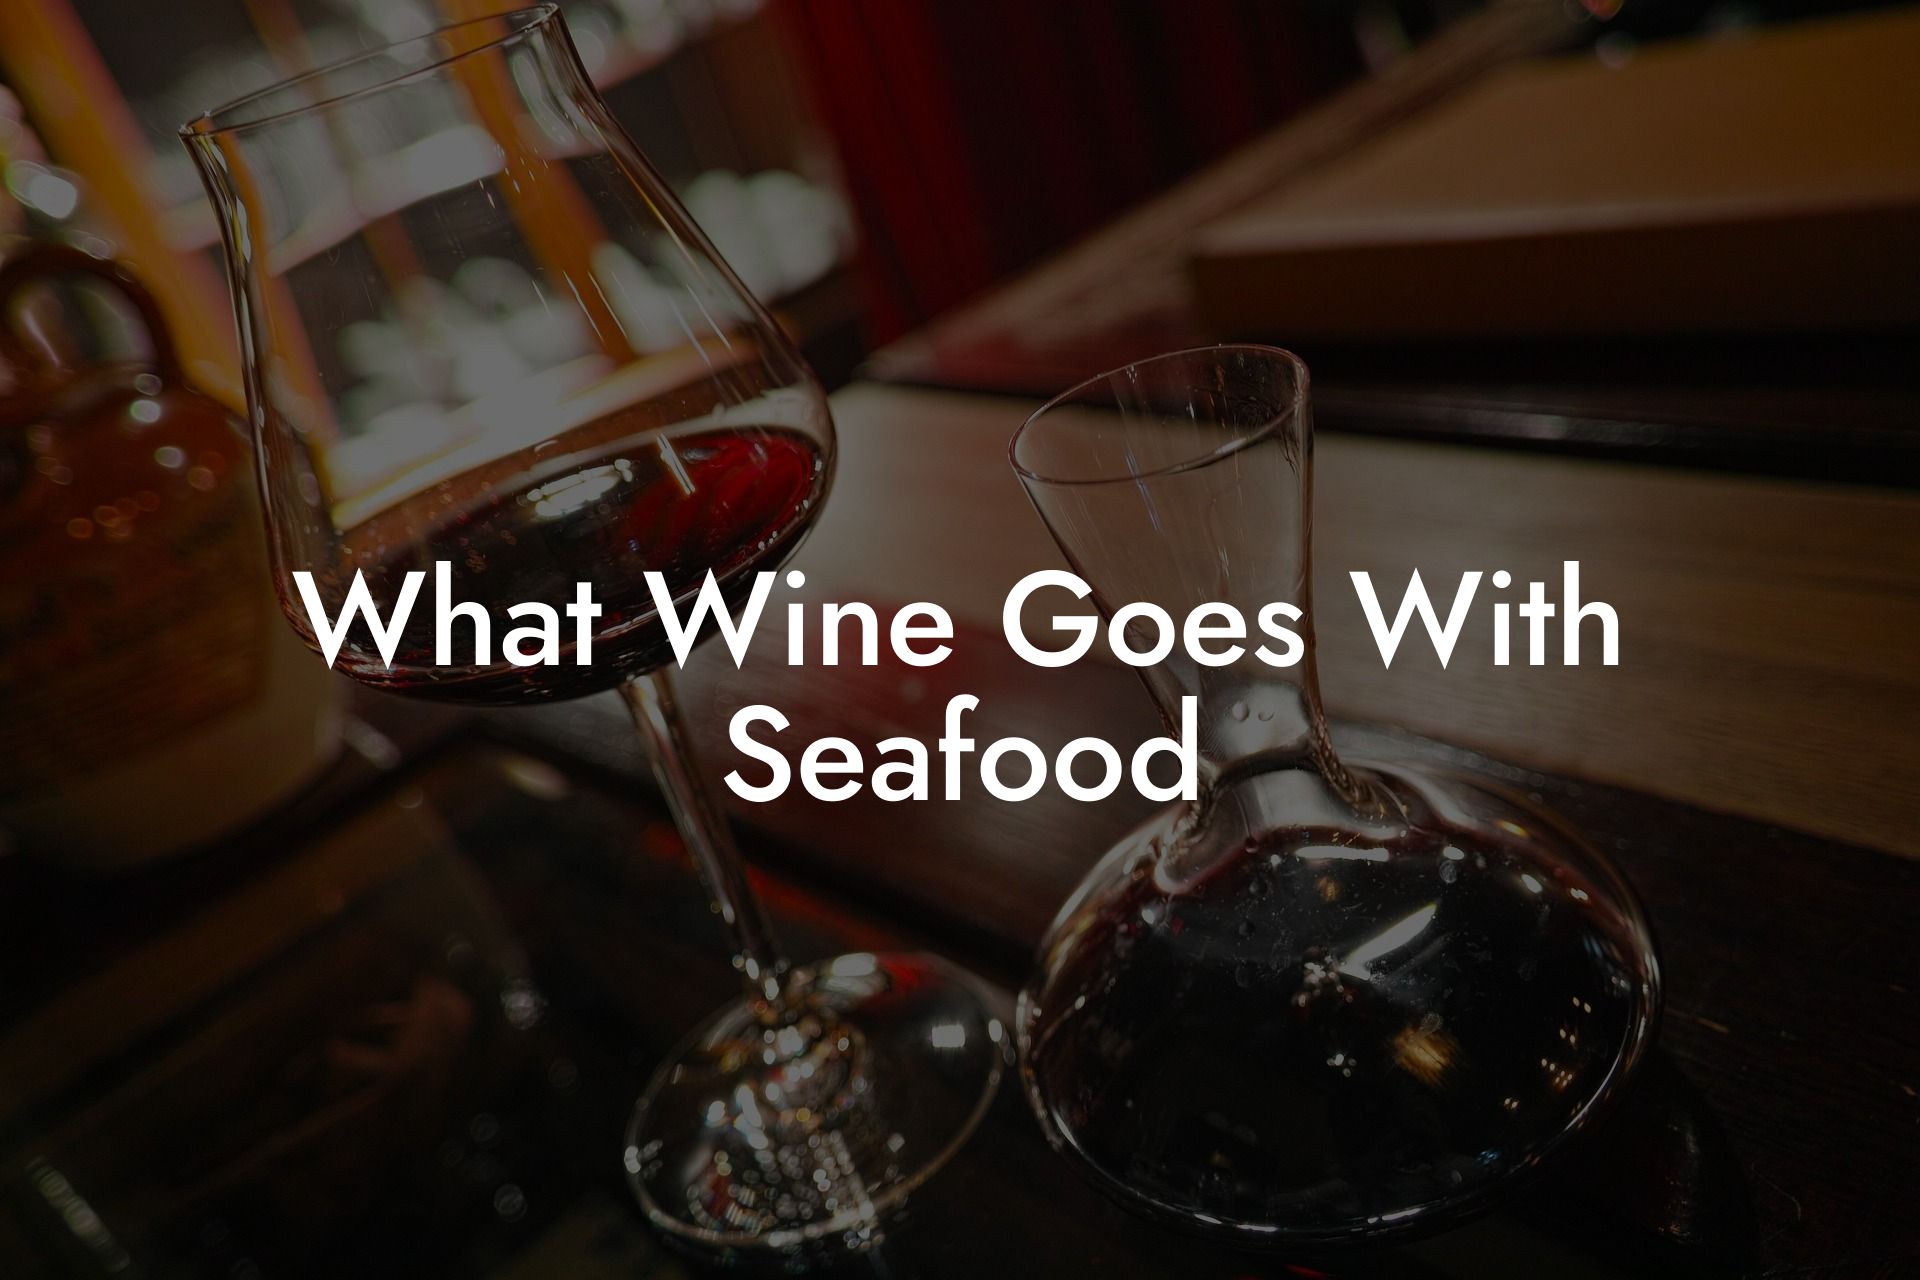 What Wine Goes With Seafood